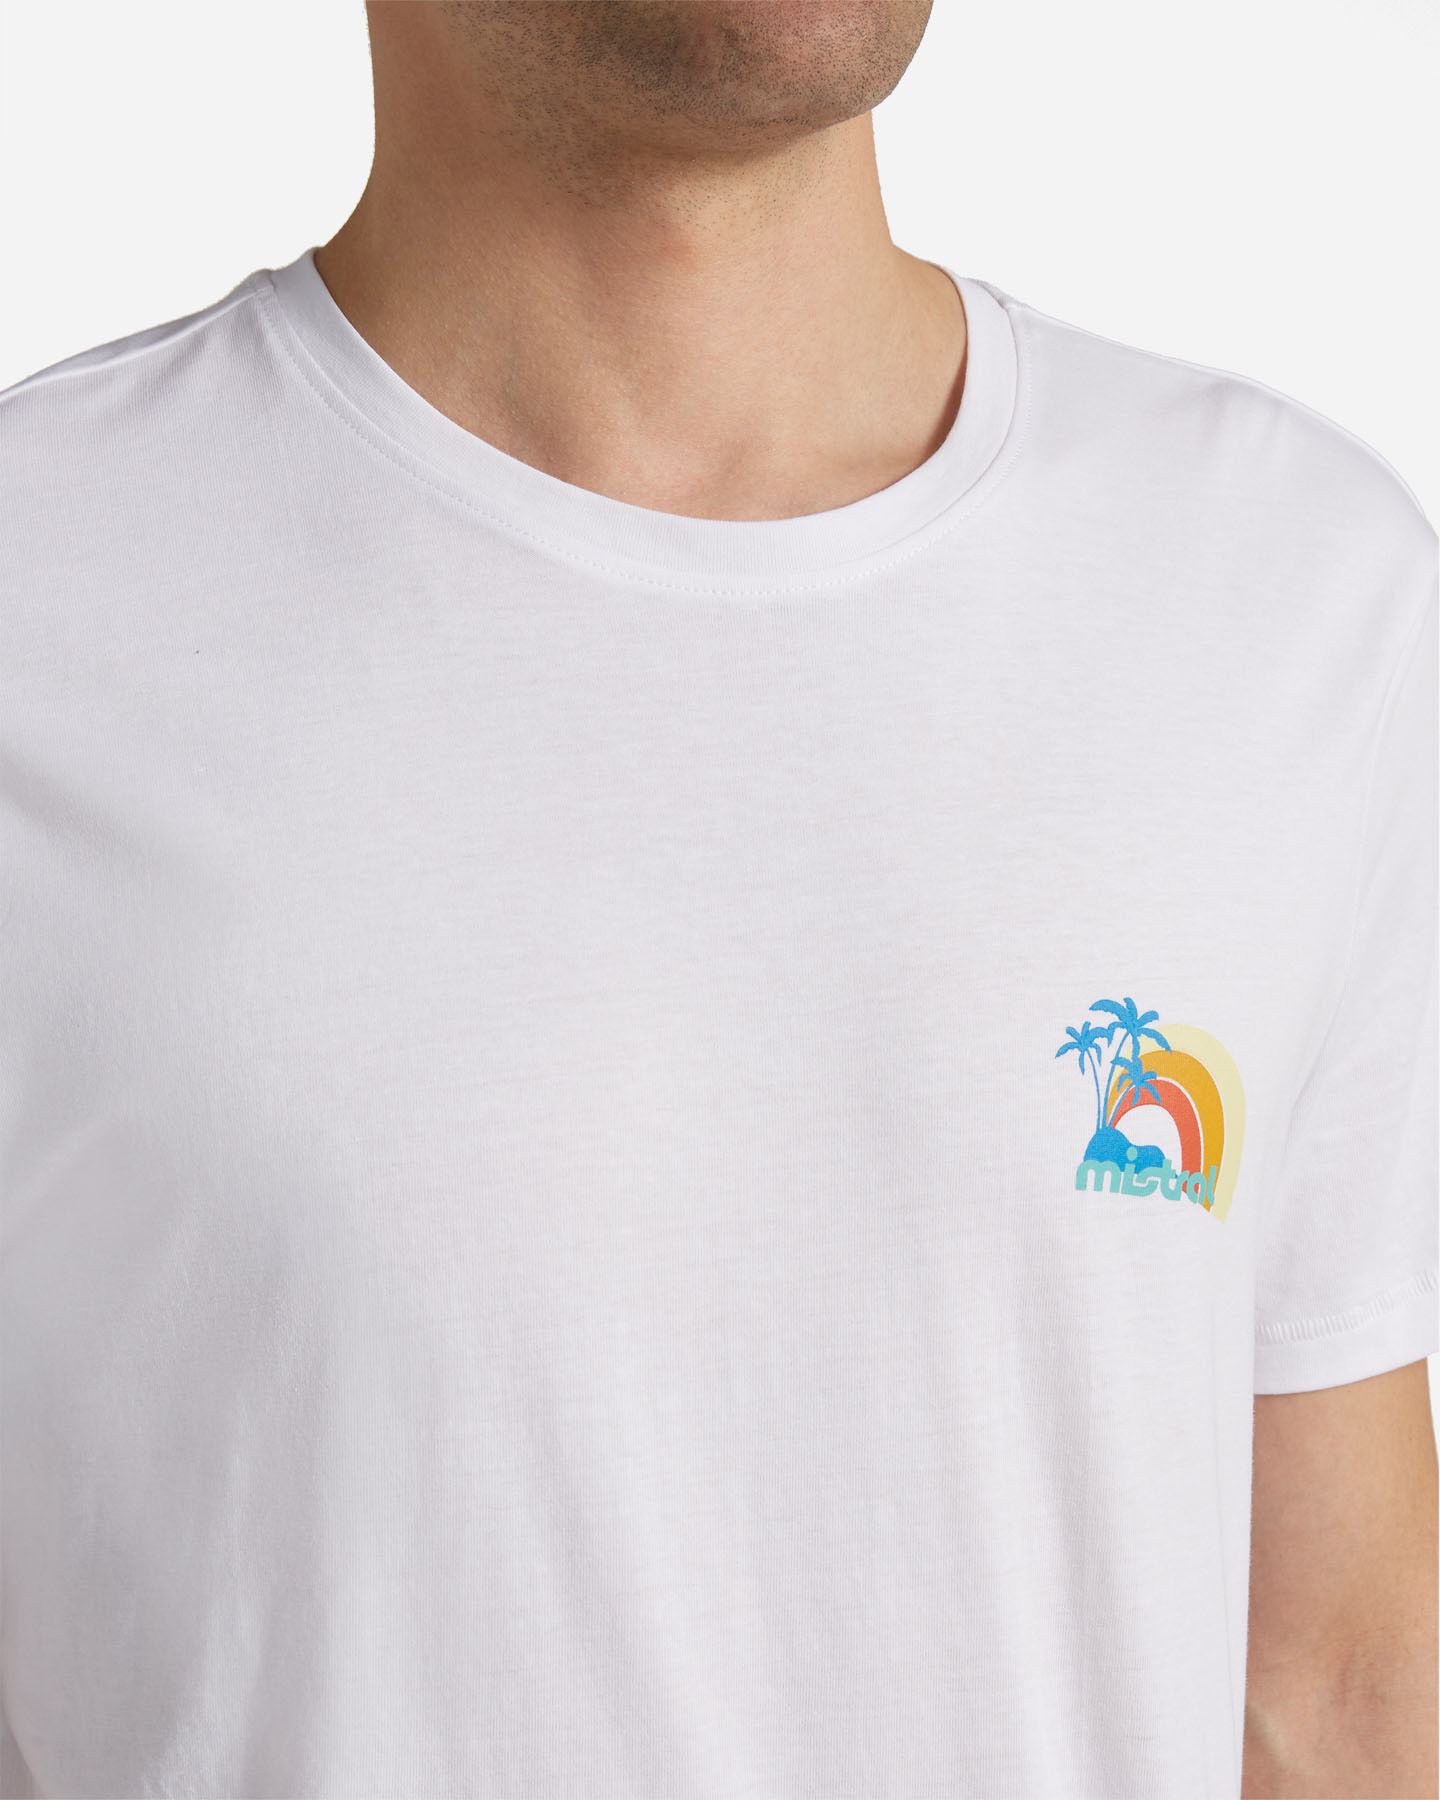  T-Shirt MISTRAL RAINBOW M S4130289|BIANCO|S scatto 4